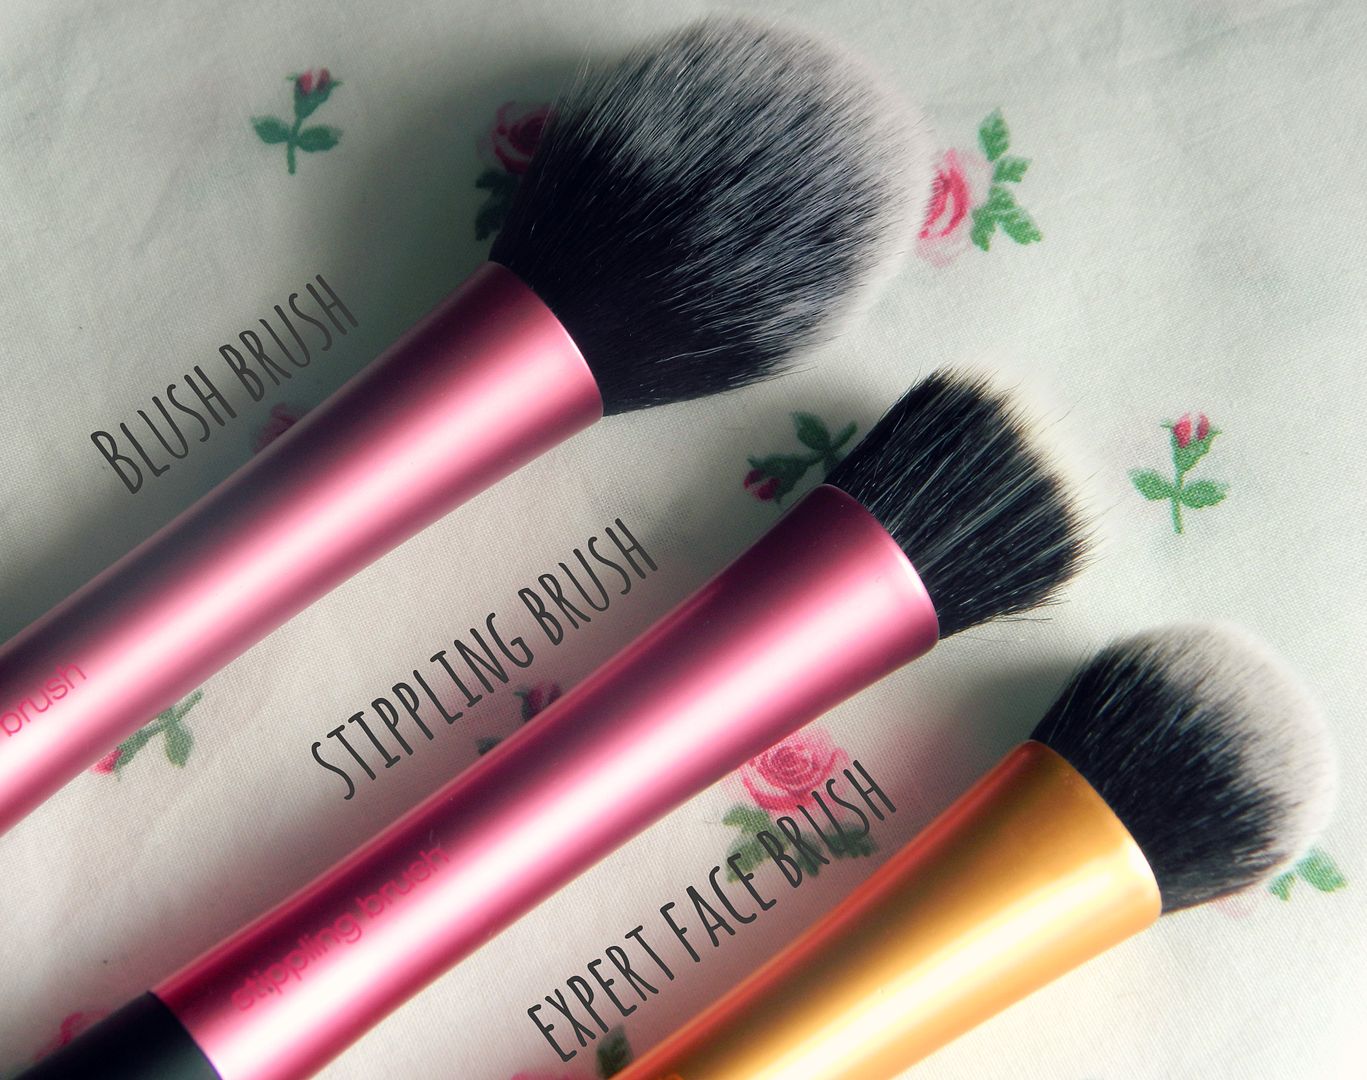 Real Techniques Makeup Brush Collection Blush Stippling Expert Face Brush Review Belle-amie UK Beauty Fashion Lifestyle Blog